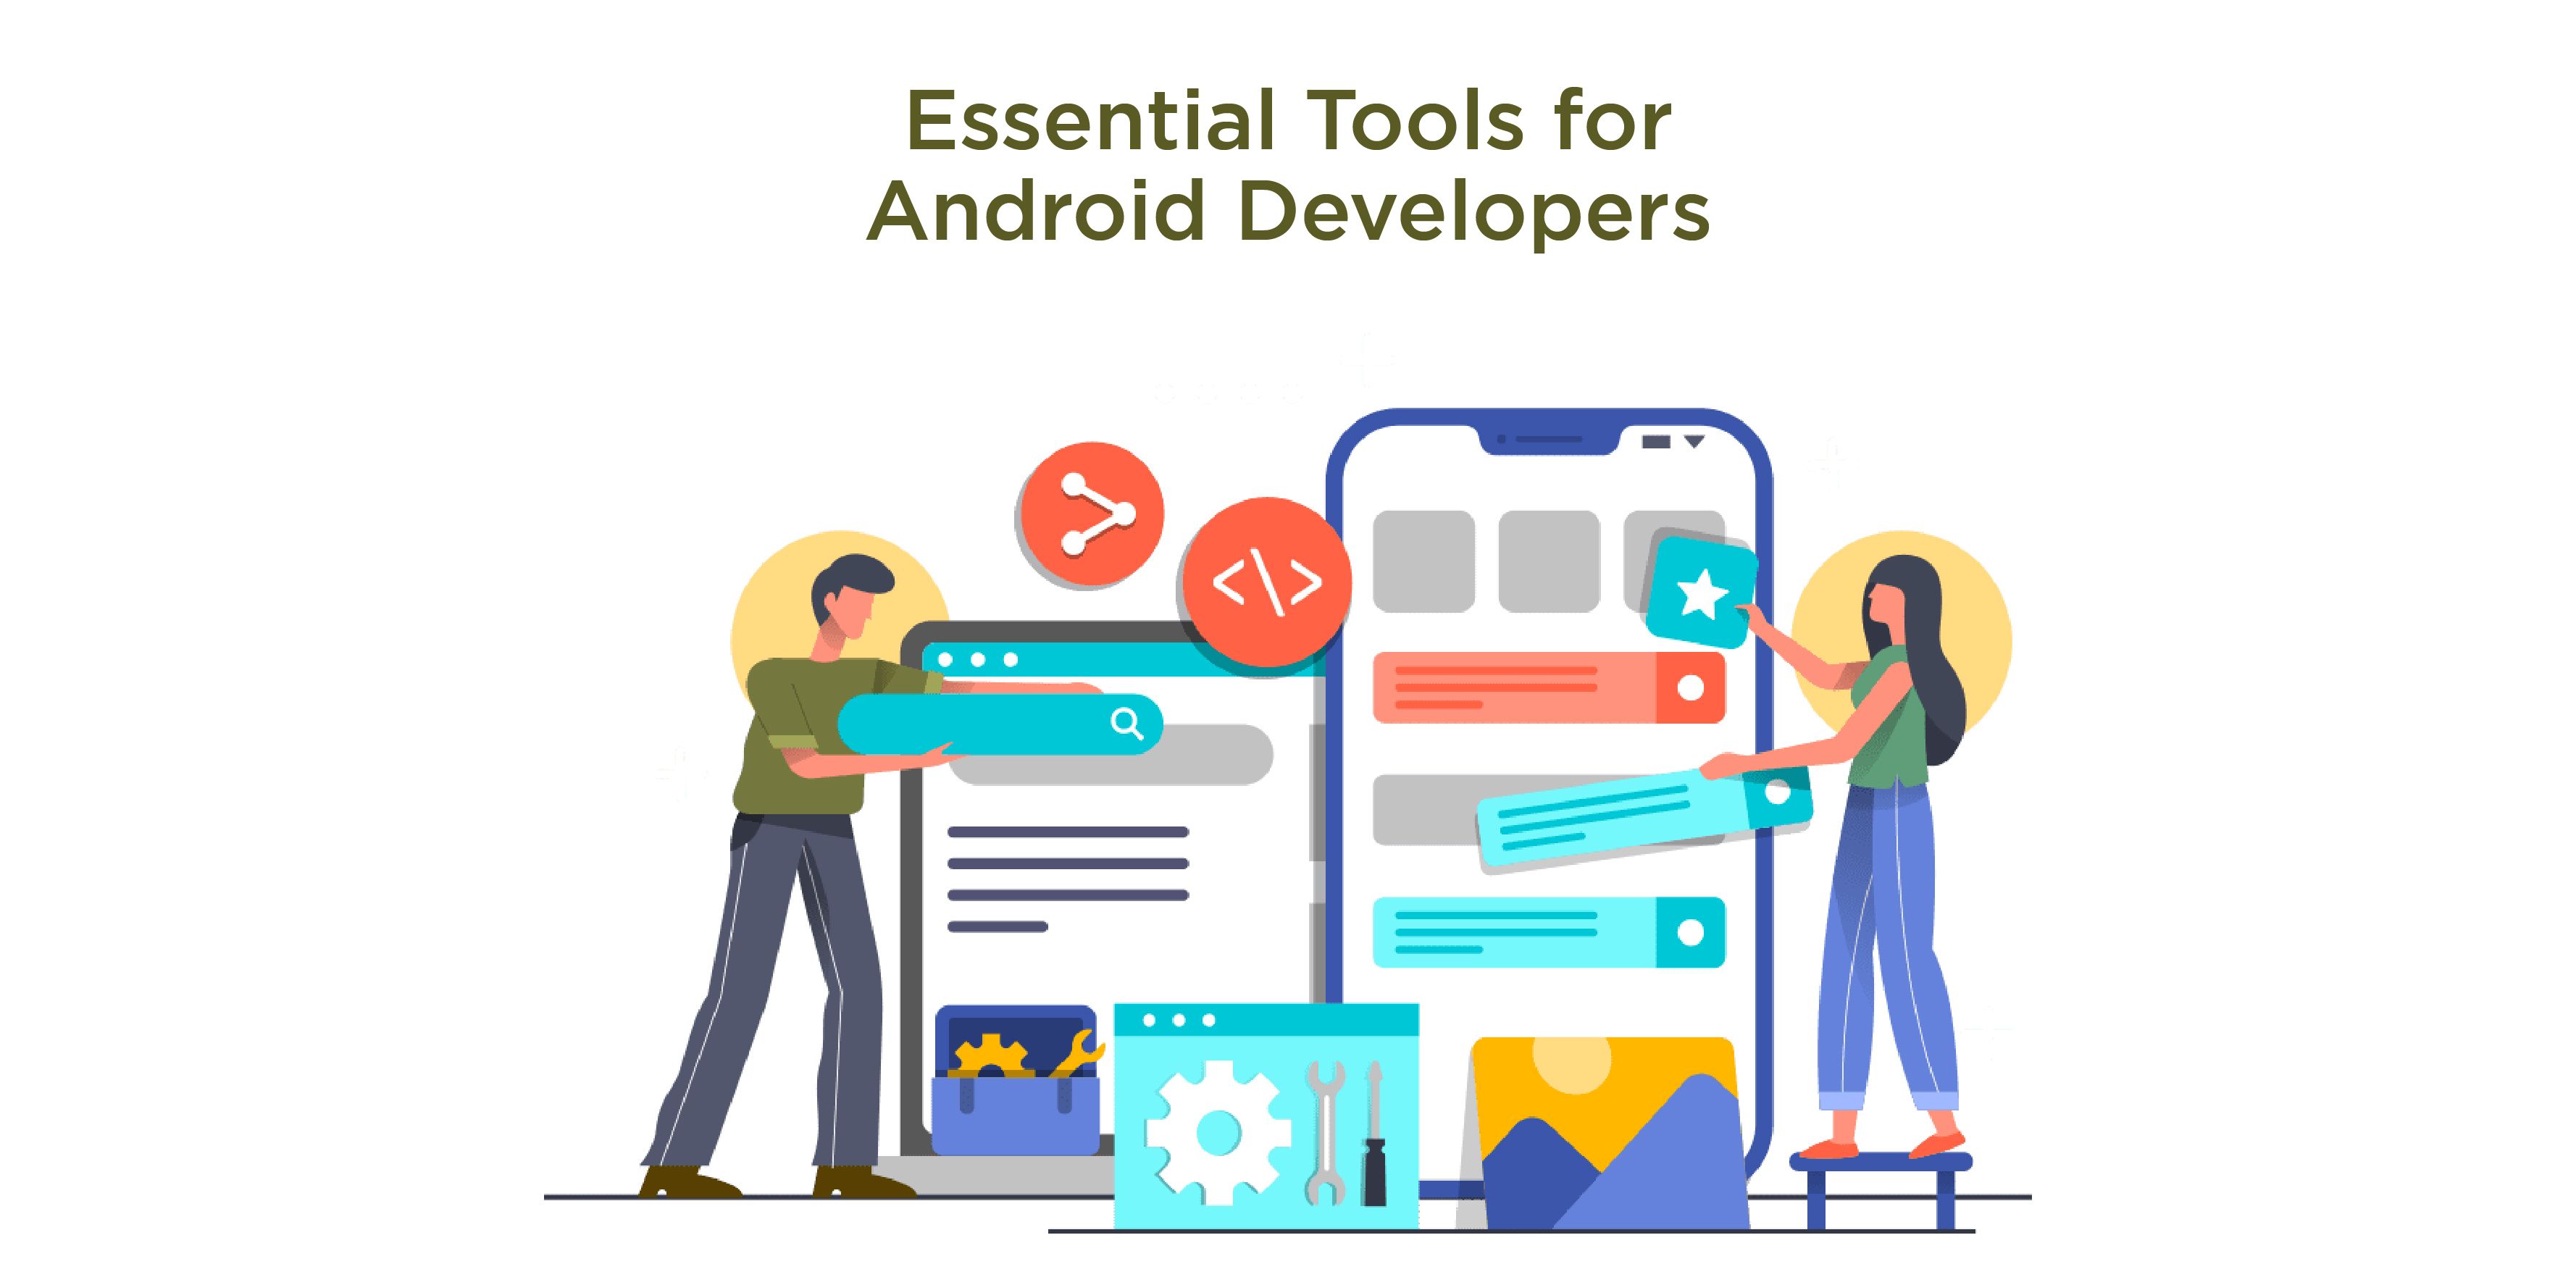 Android Developers hiring guide step 2: Essential Tools for Android Developers